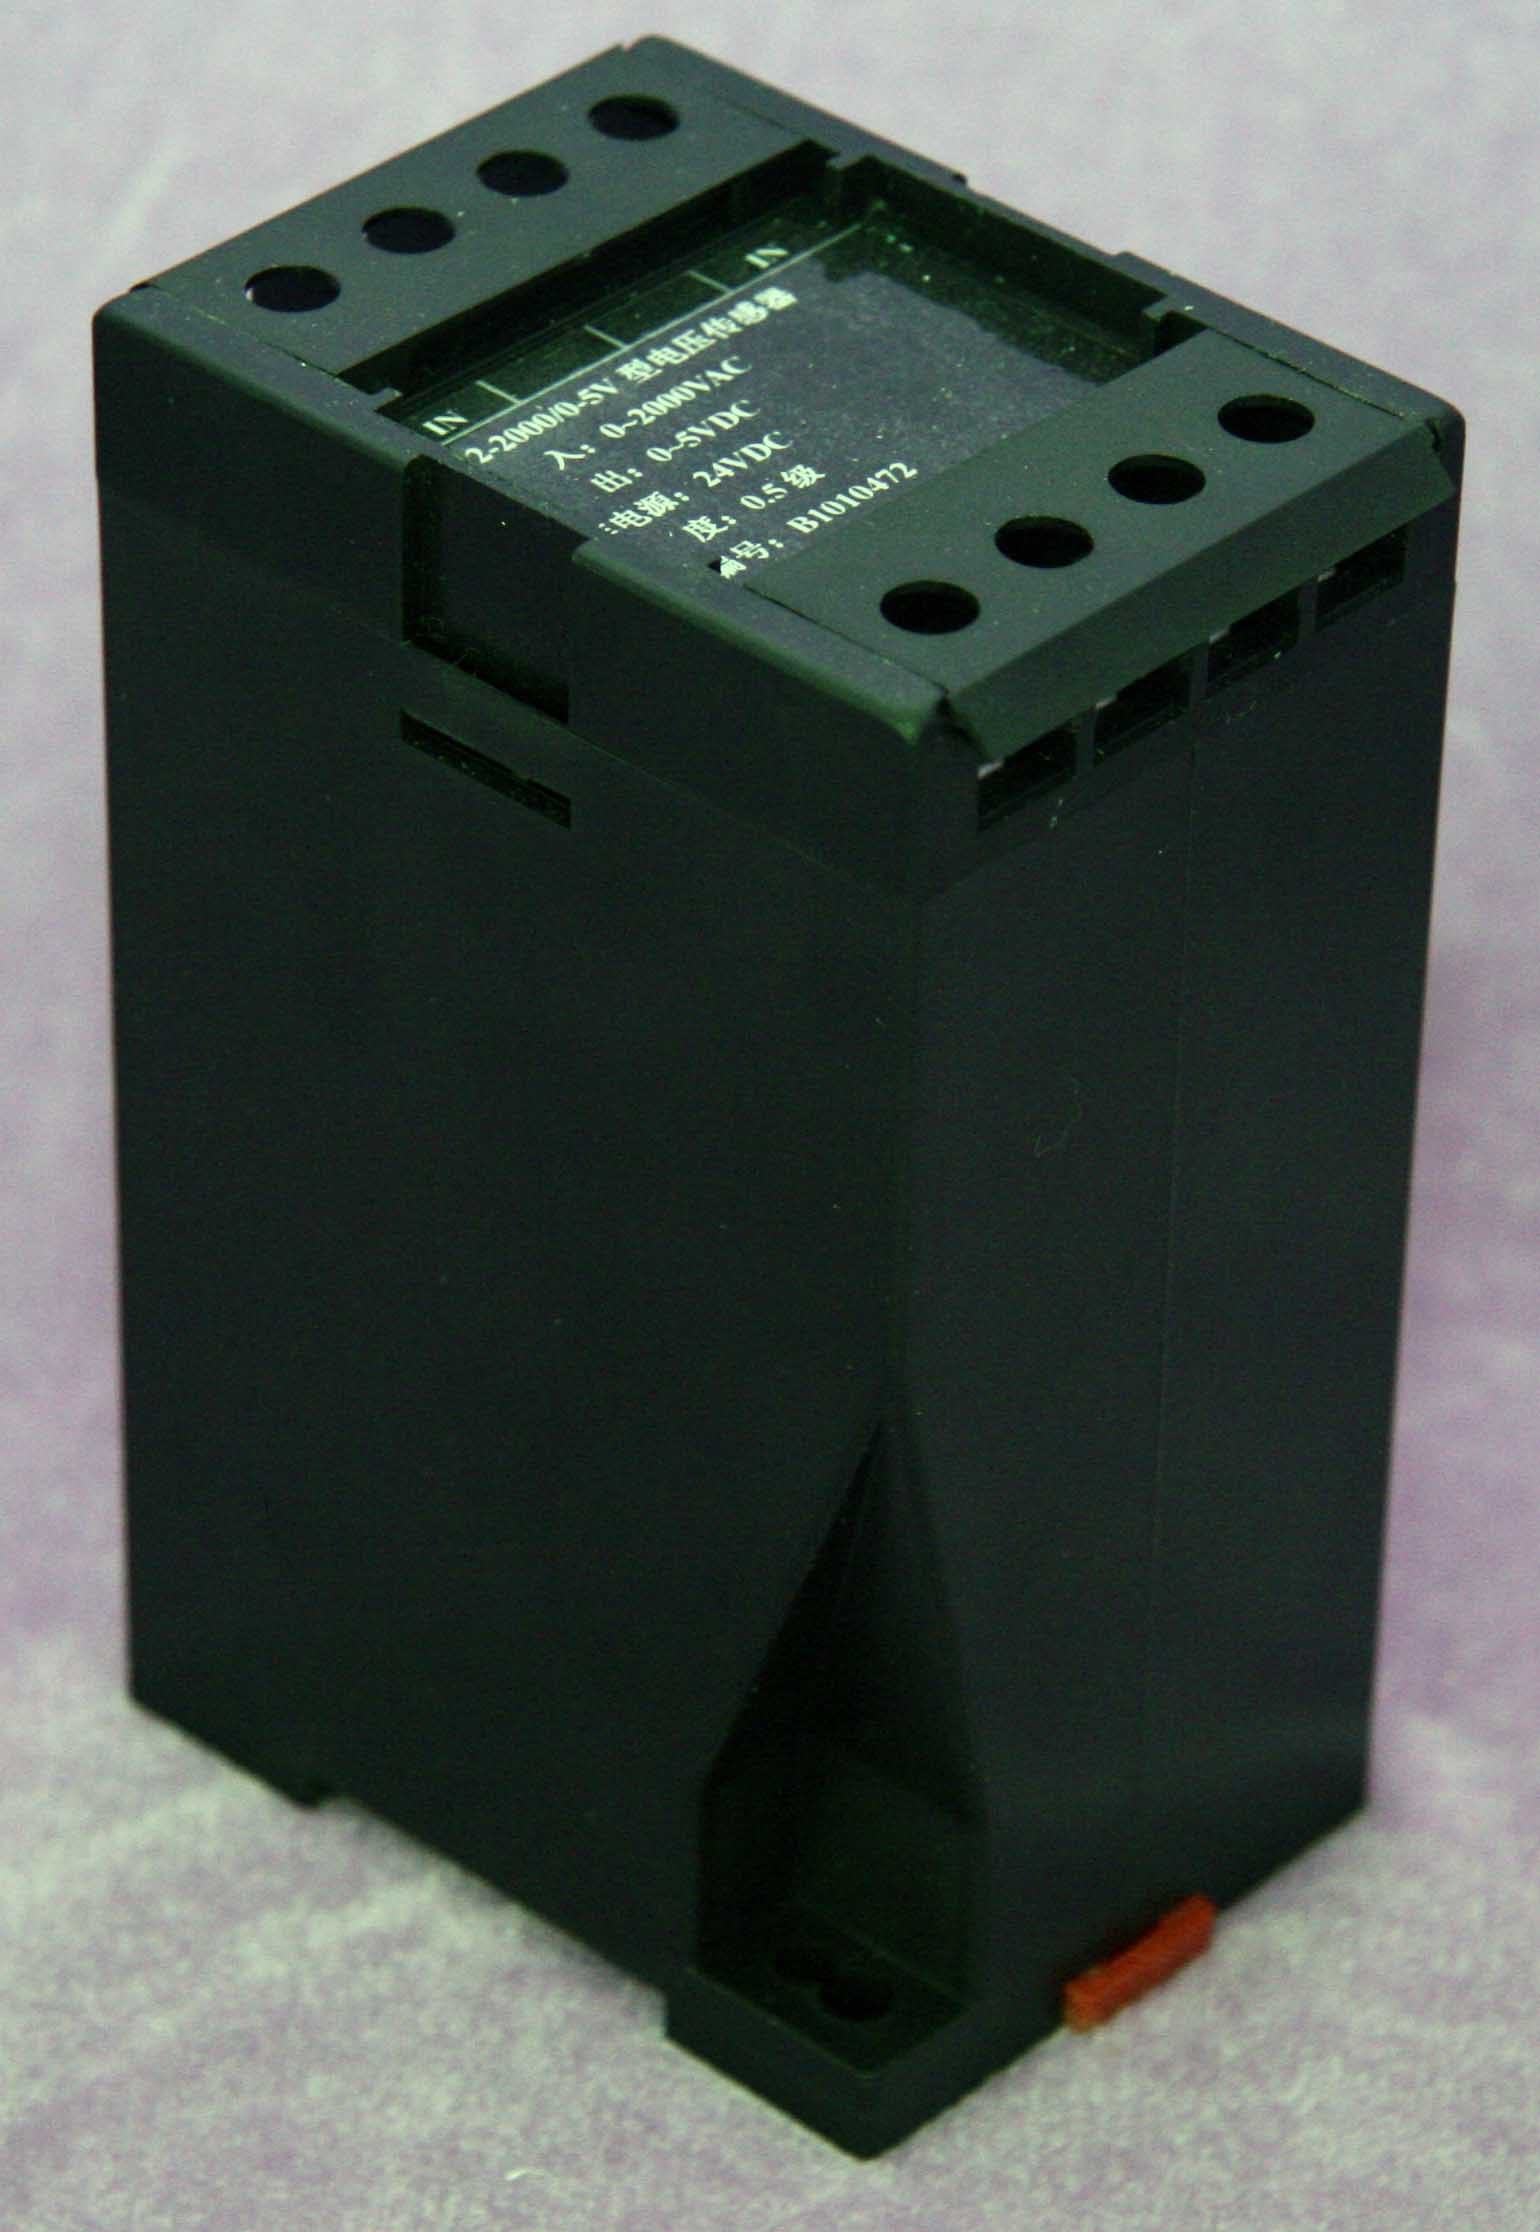 D8 Series AC Voltage Tansducer / Transmitter